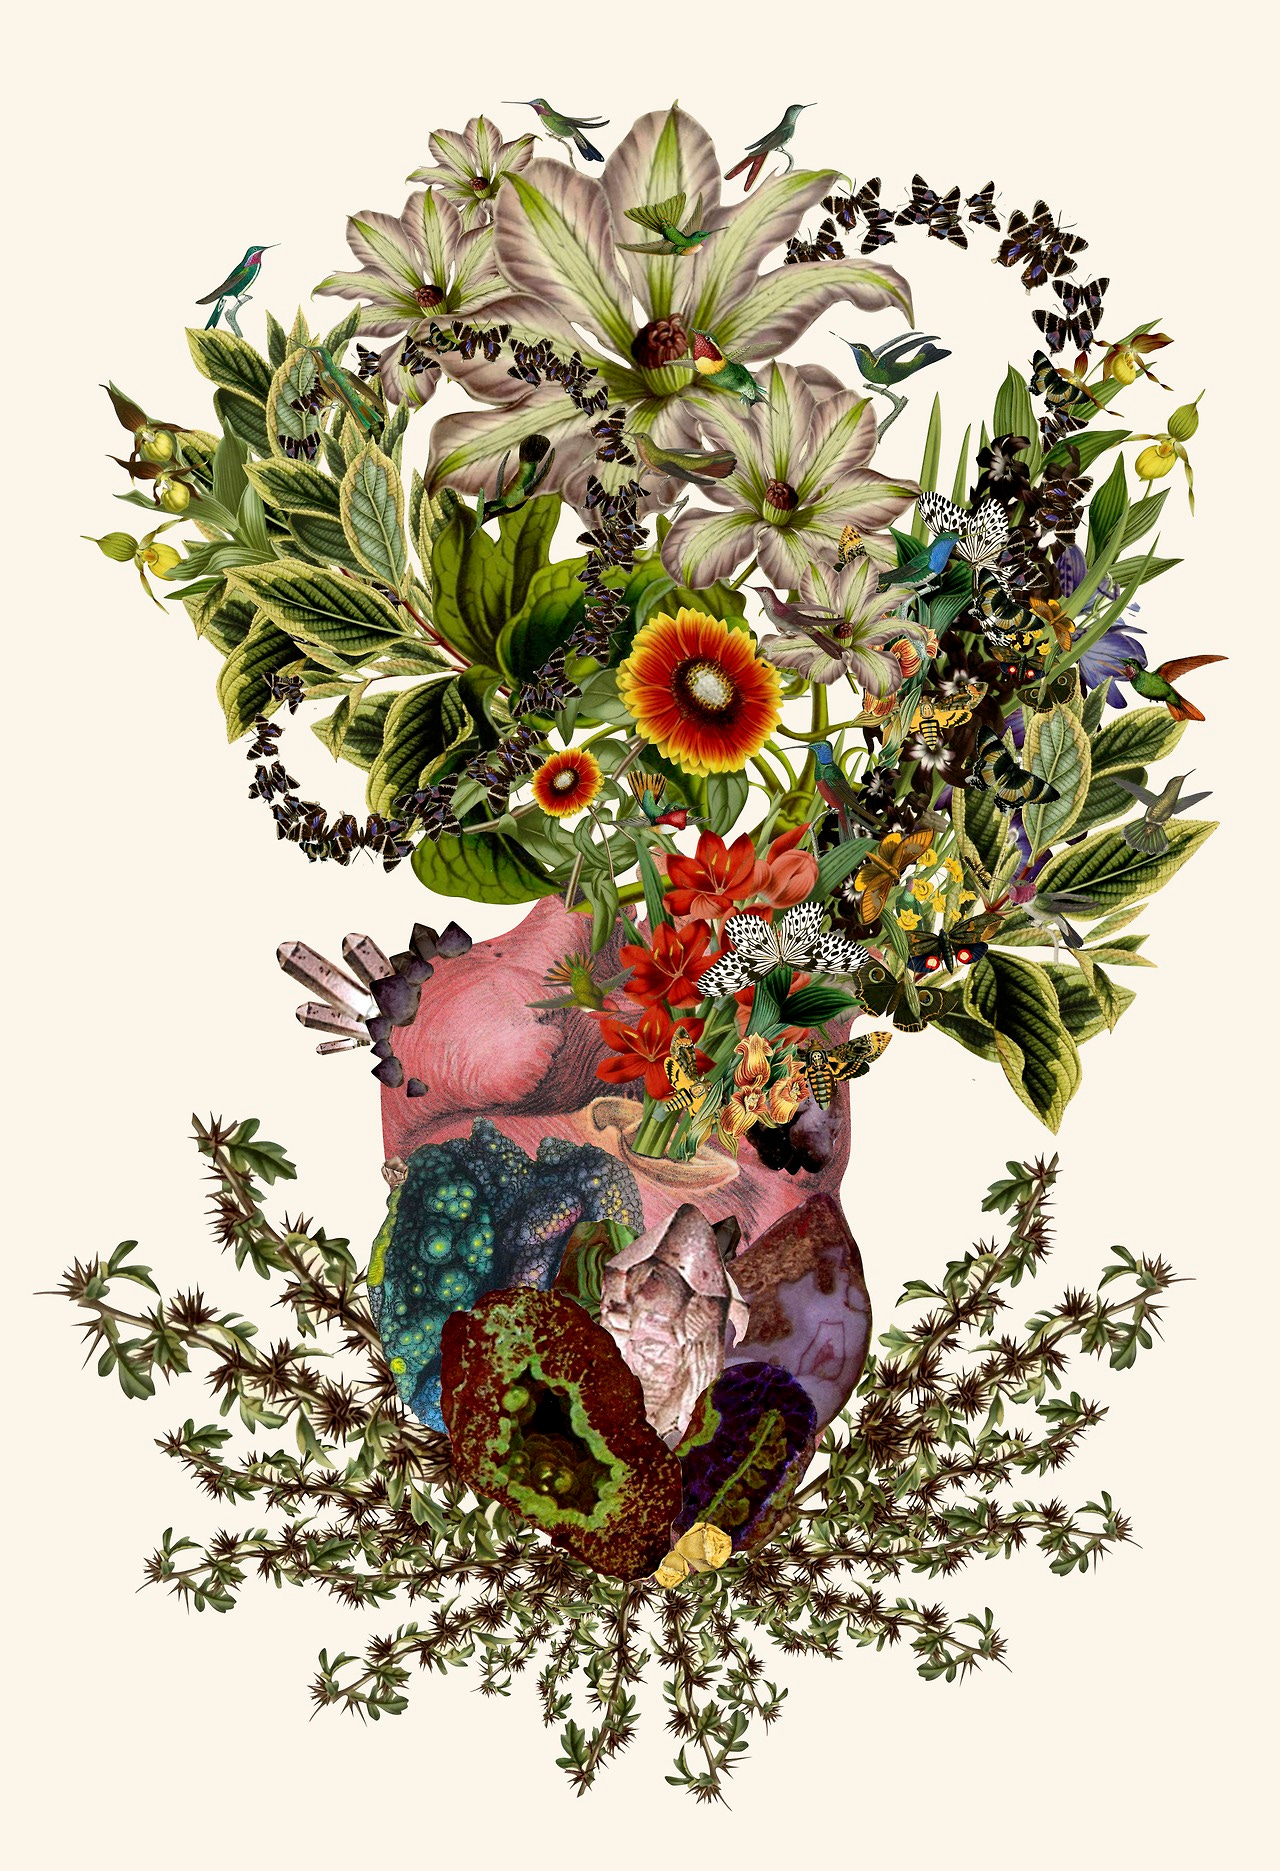 New Anatomical Collages by Travis Bedel — Colossal